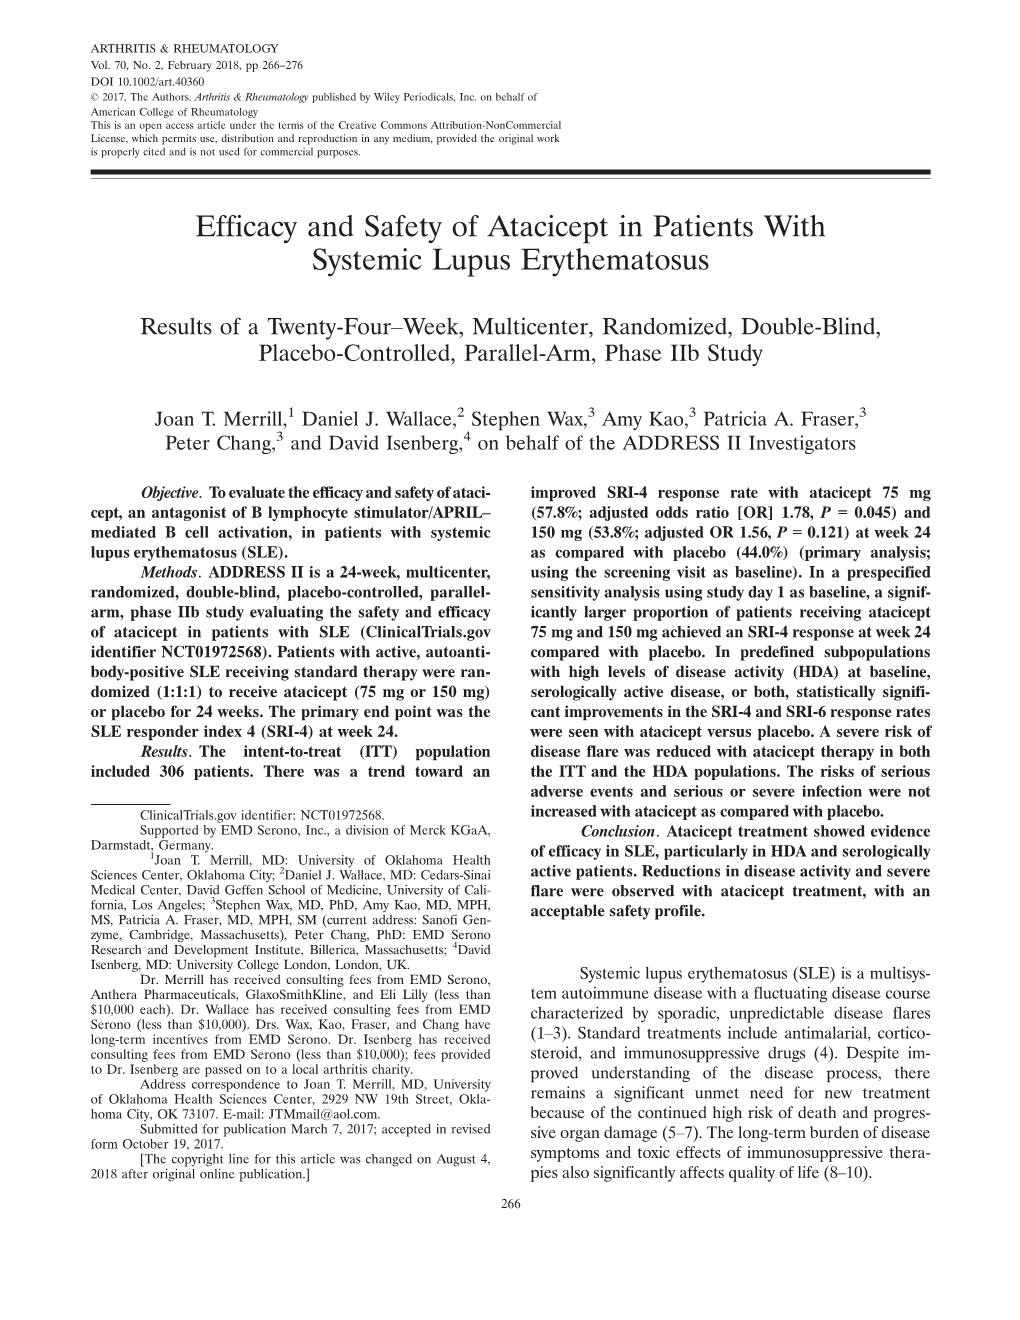 Efficacy and Safety of Atacicept in Patients with Systemic Lupus Erythematosus